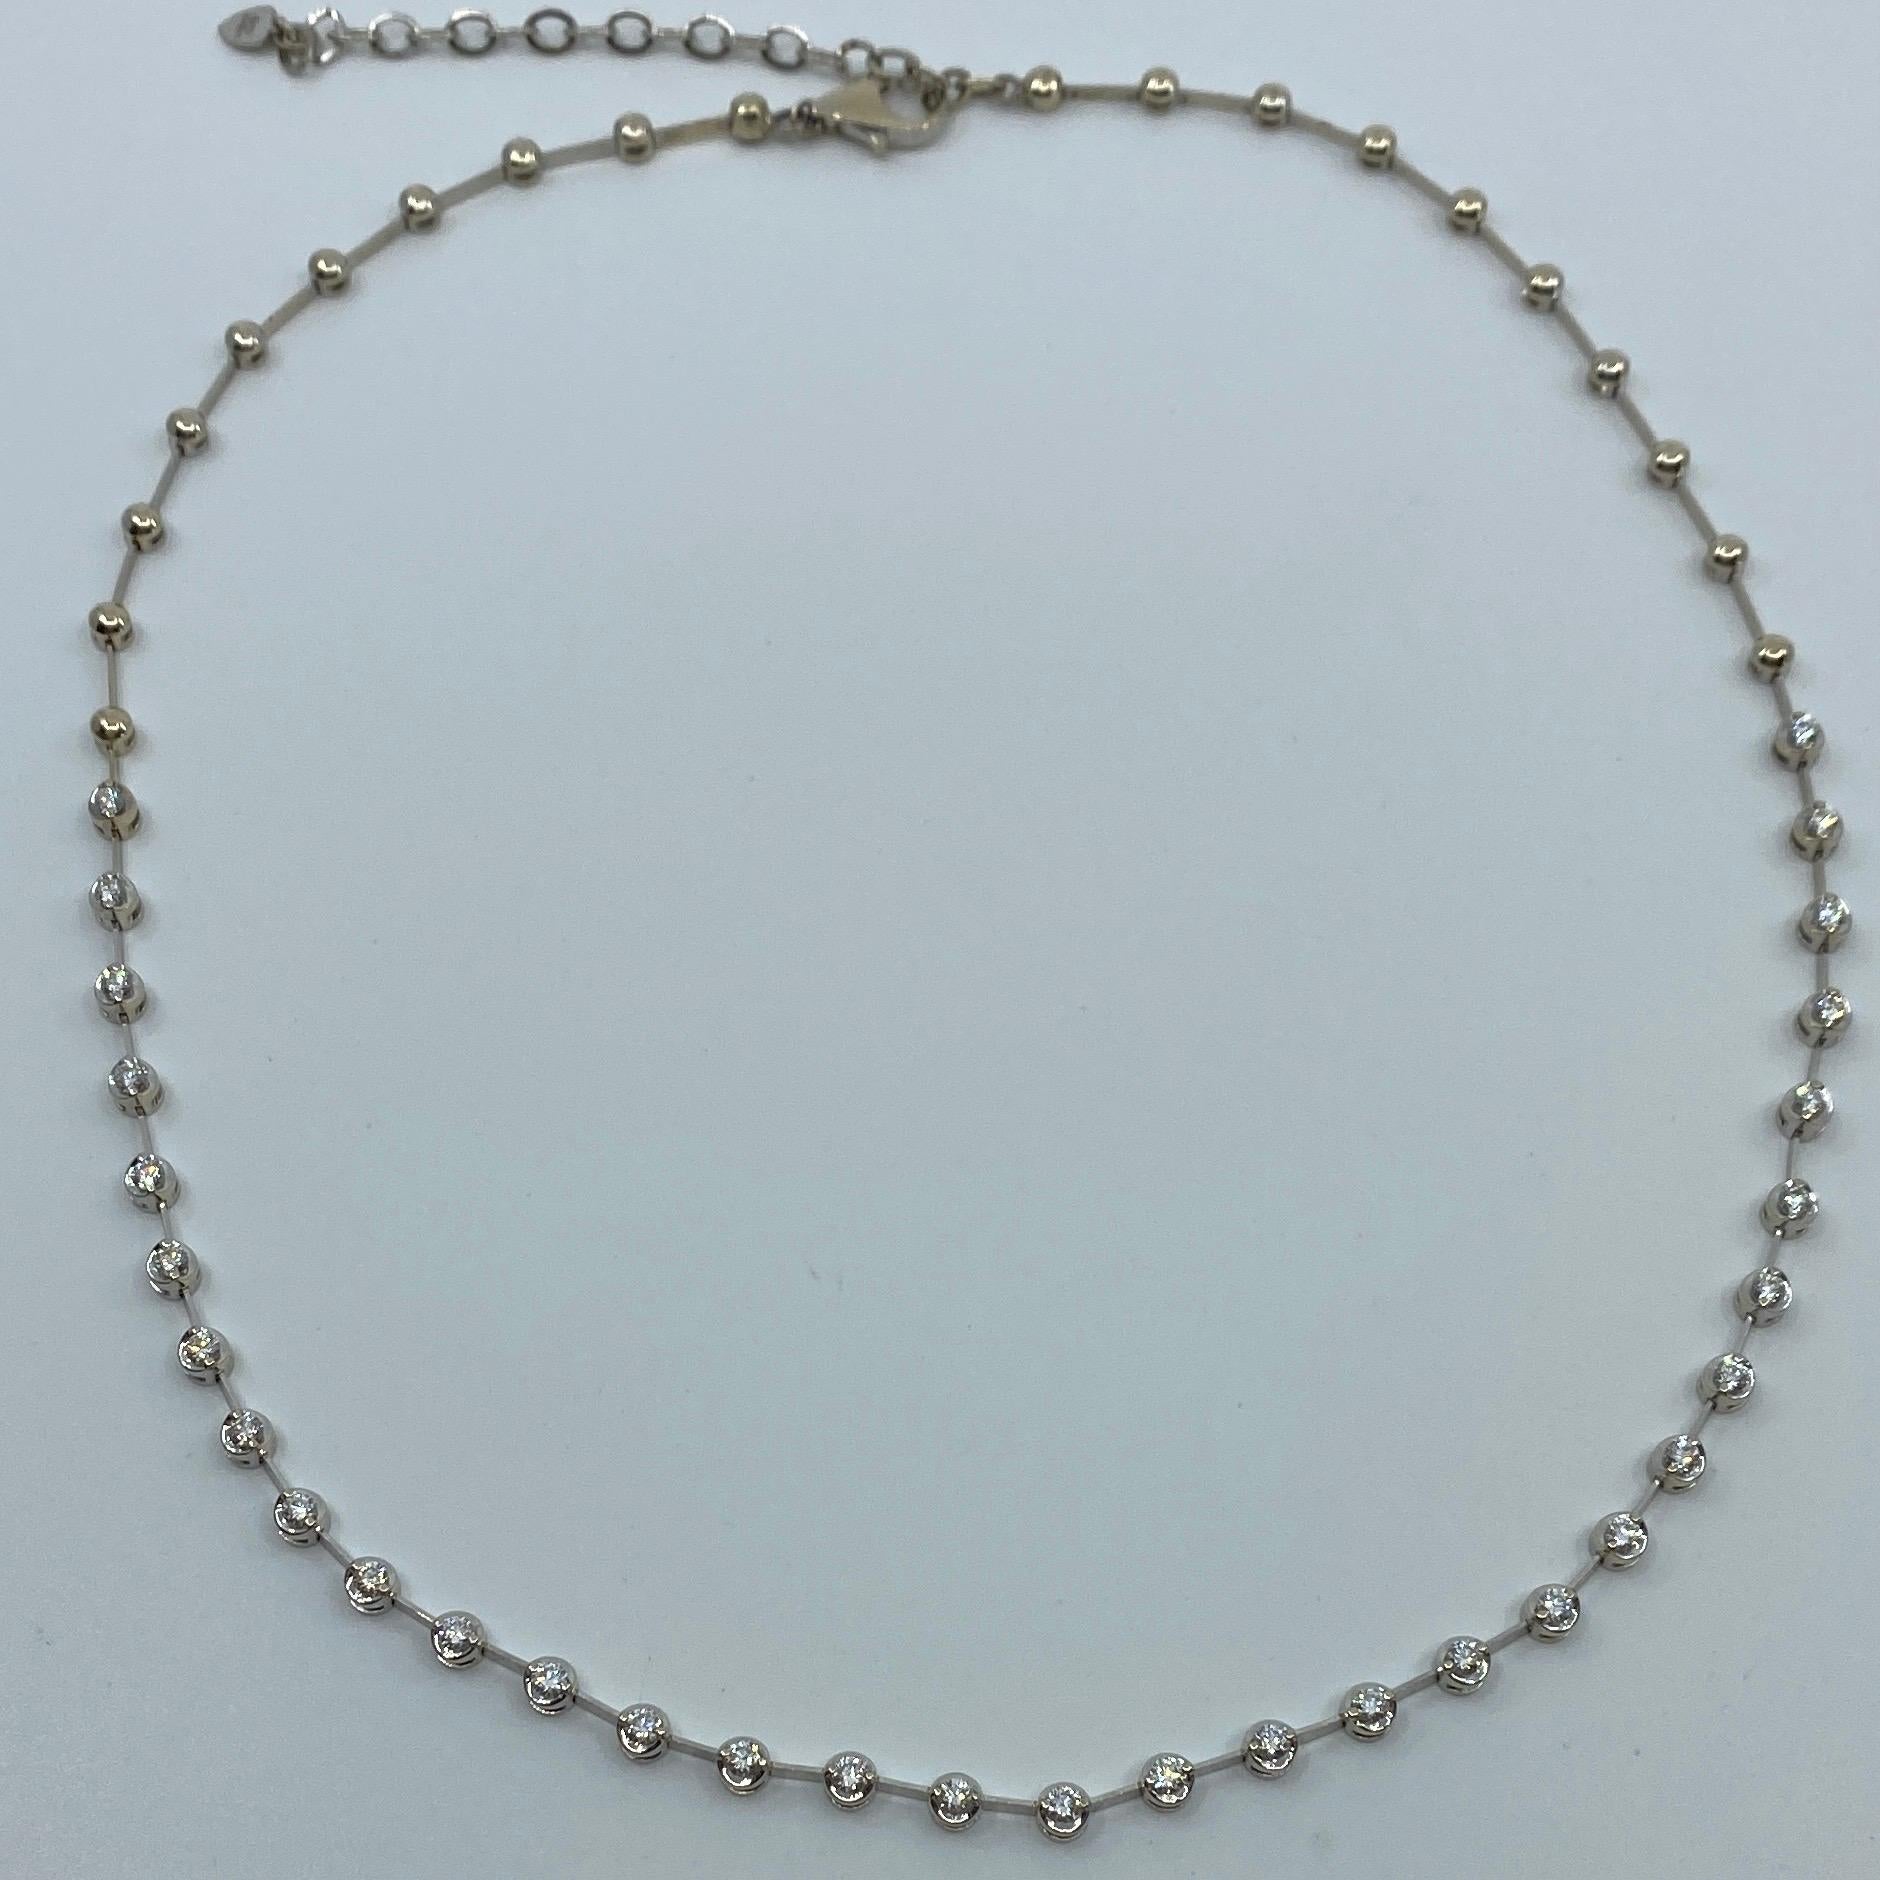 18 Karat White Gold Natural Diamond Line Necklace.

1.60 total carat of diamonds measuring 2.5mm Si1/2 clarity G/H colour. 32 stones total.

Set in a beautiful 18k white gold line necklace.

Measures 18' and weighs 16.1g

Necklace is brand new and